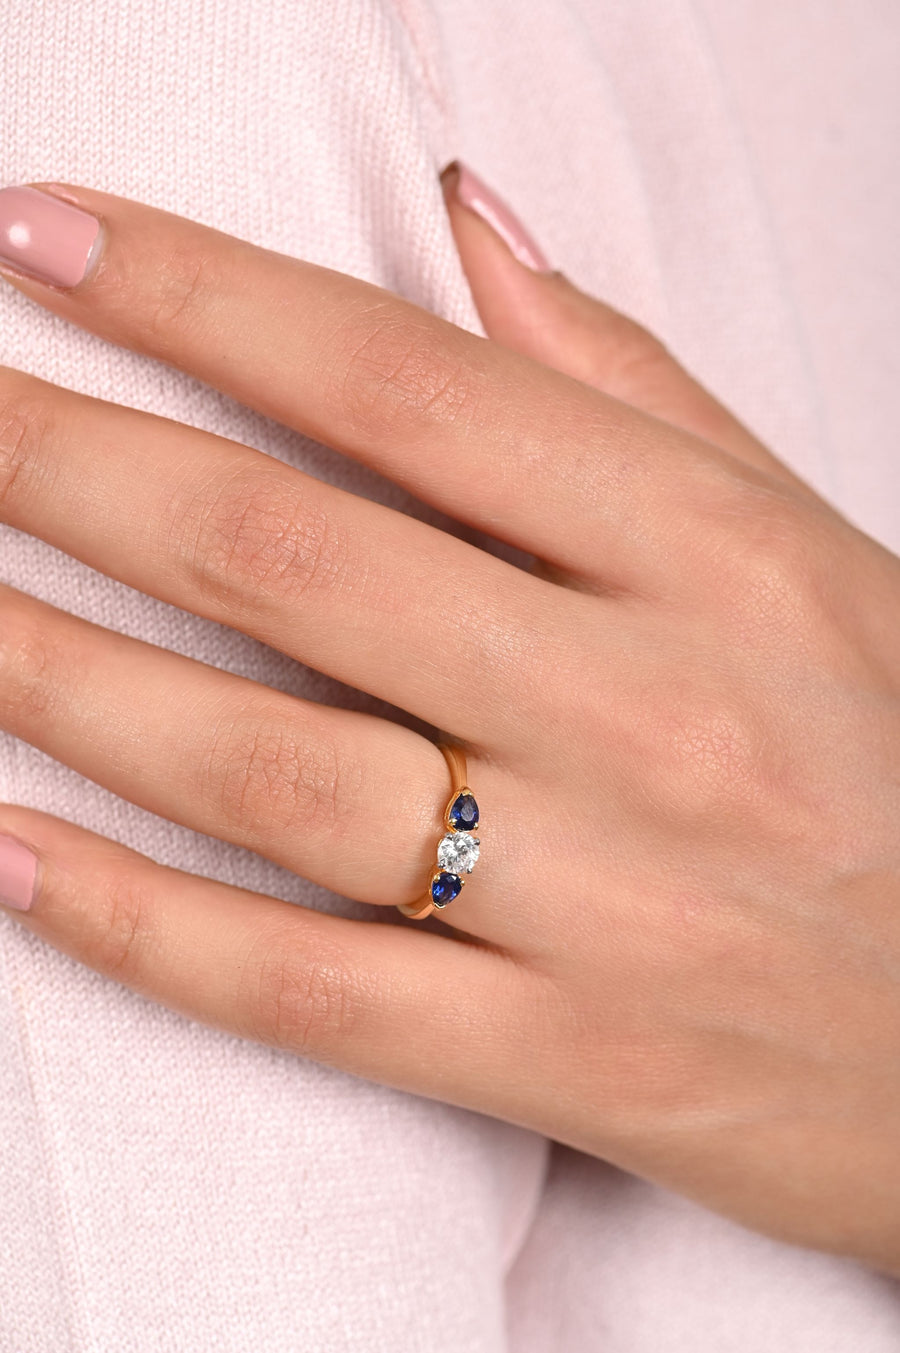 The Colour Pop of Sapphire Ring in 18K Yellow Gold